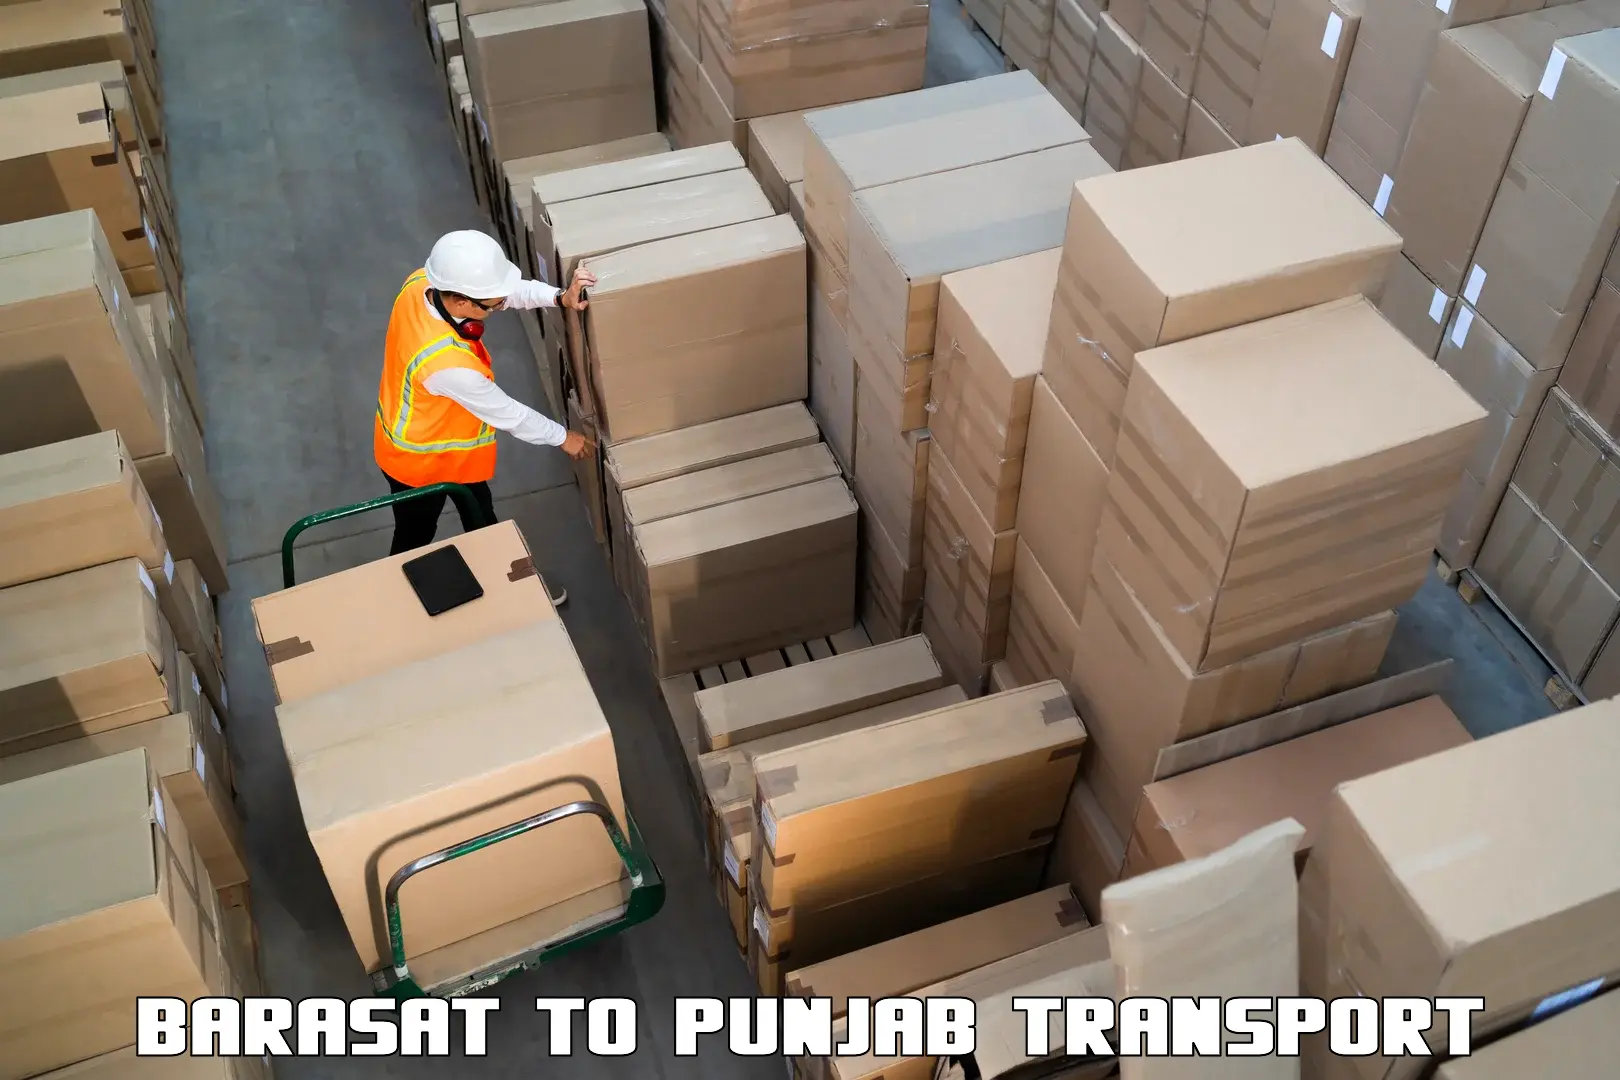 Container transport service Barasat to IIT Ropar